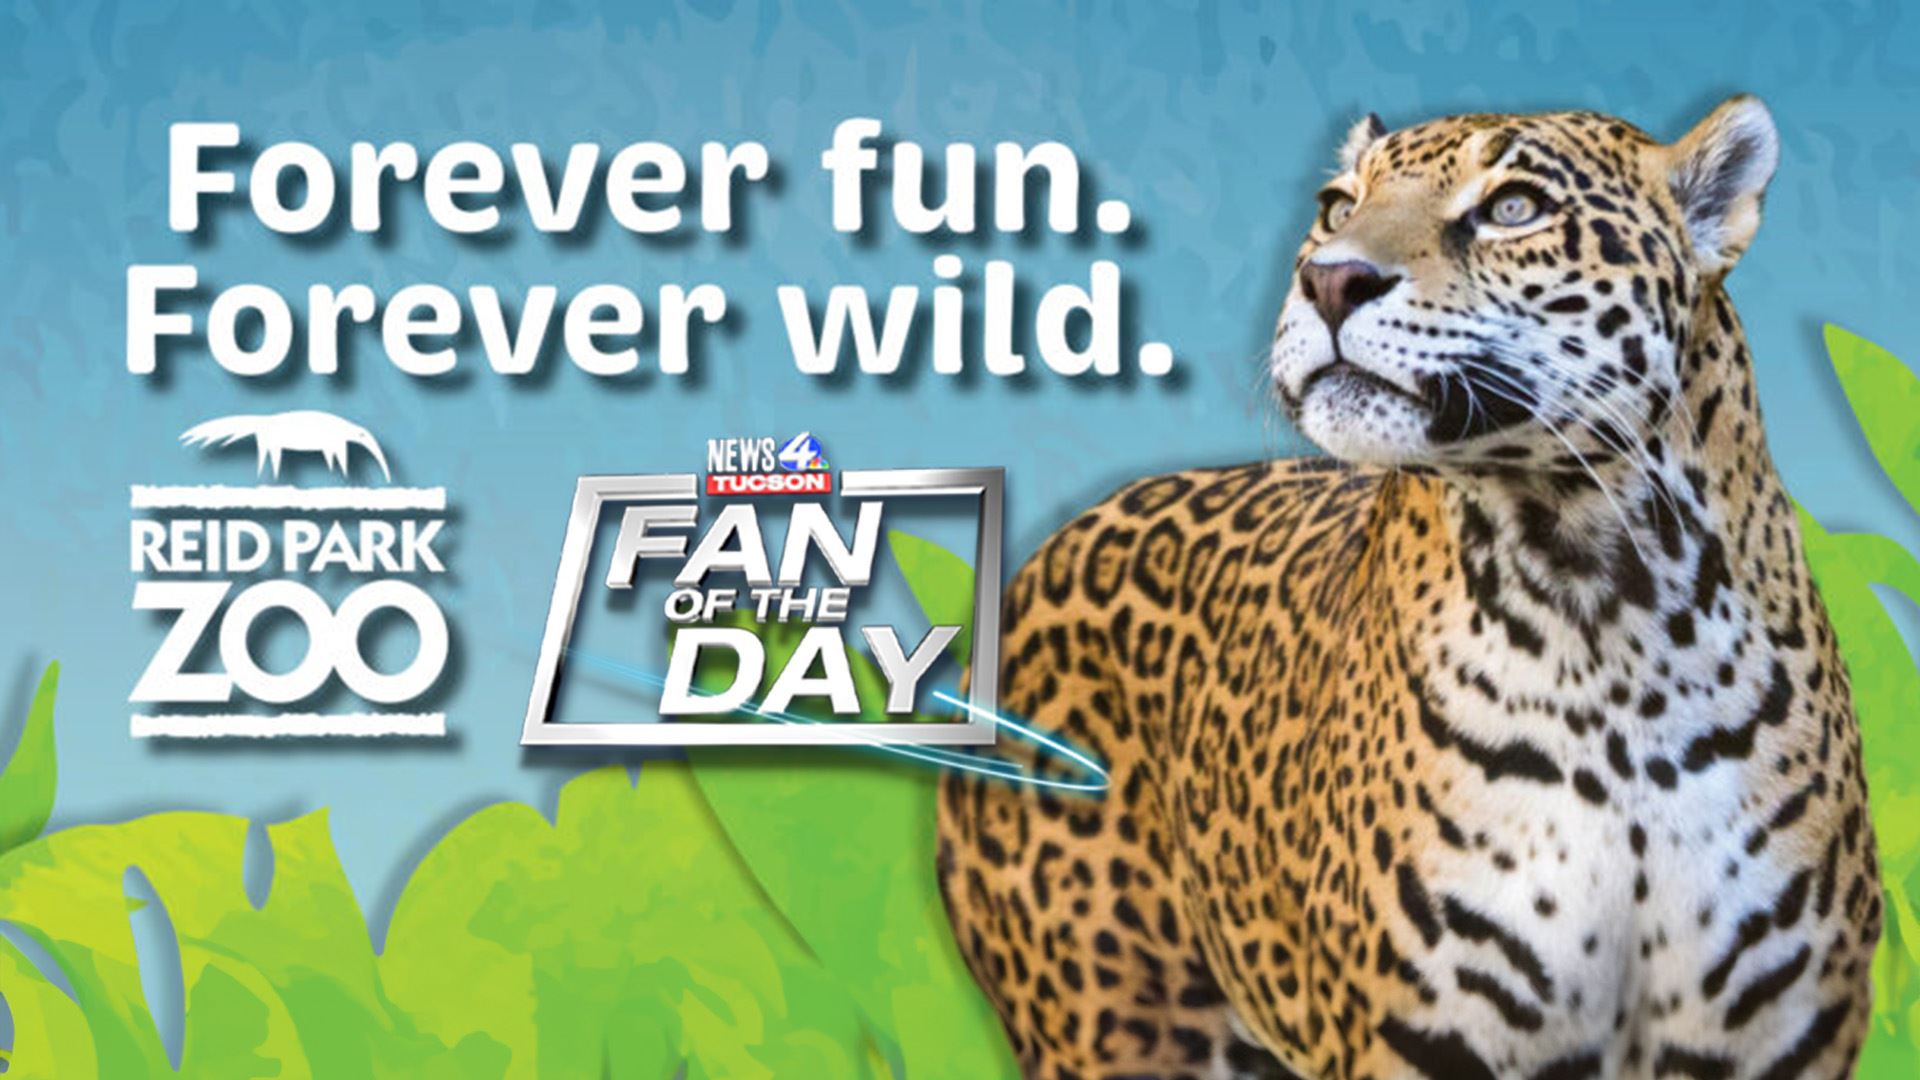 Fan of the Day - Reid Park Zoo - Forever Fun. Forever Wild